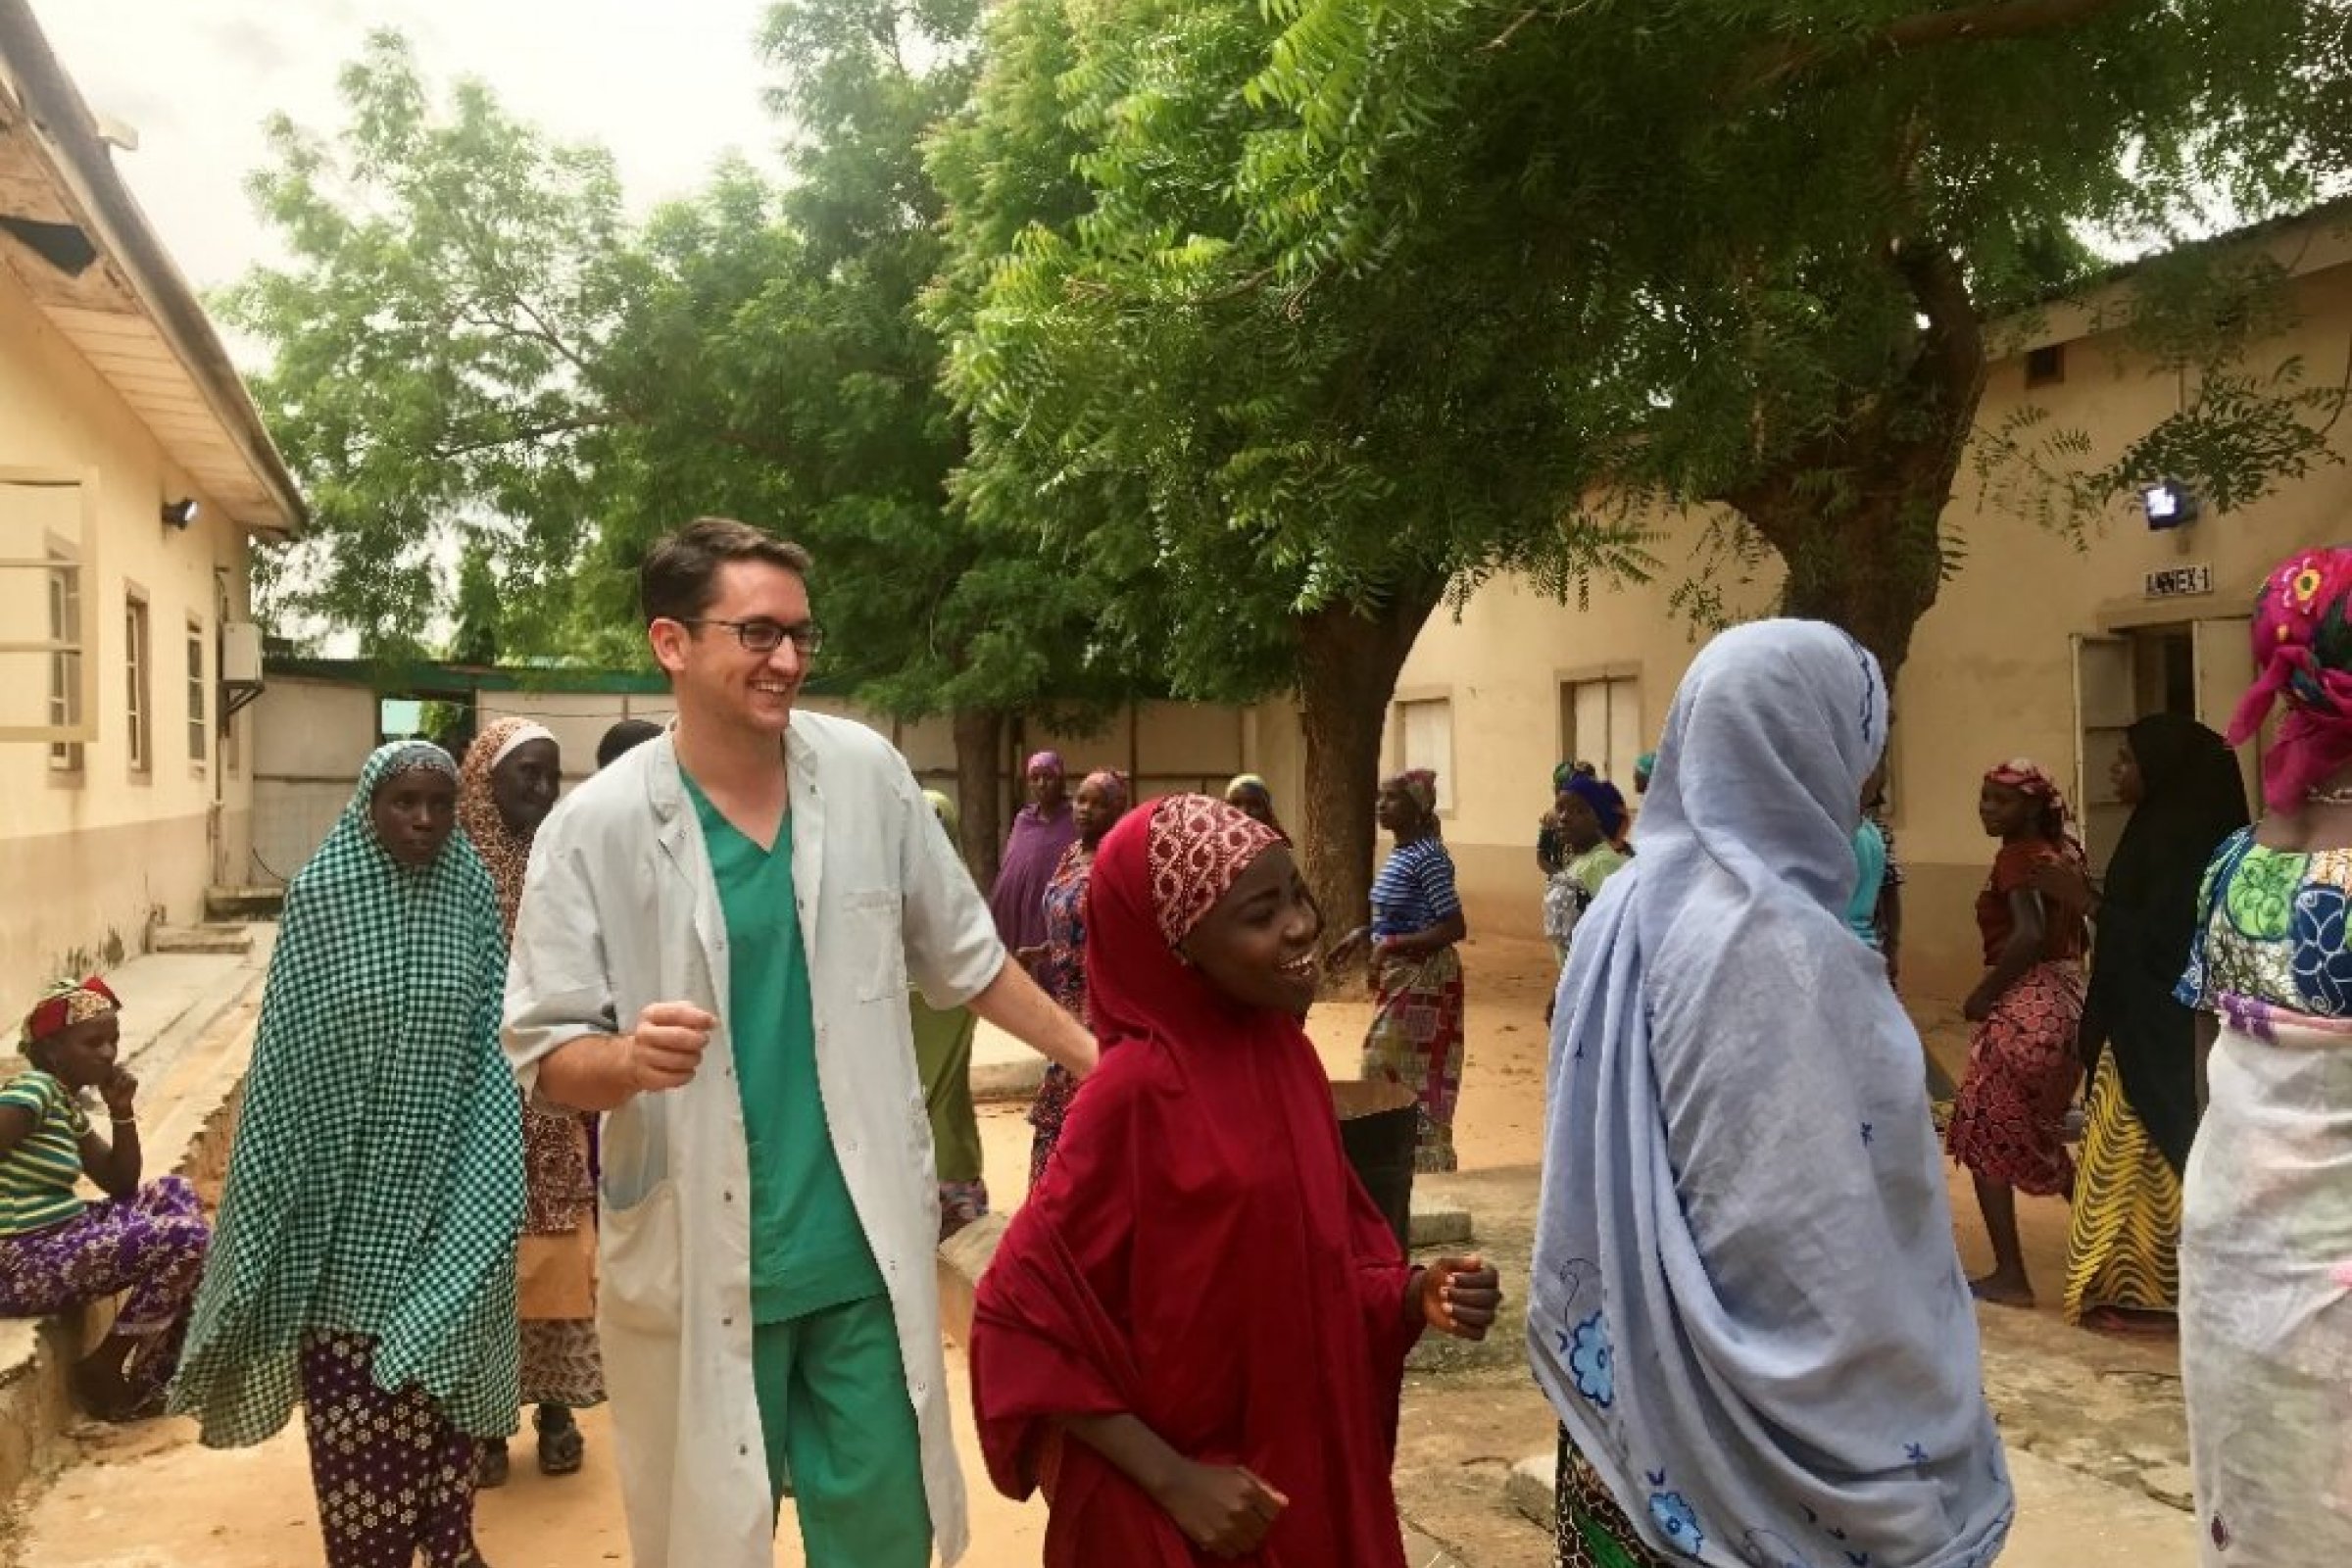 Jared dances with patients outside the fistula ward in Jahun